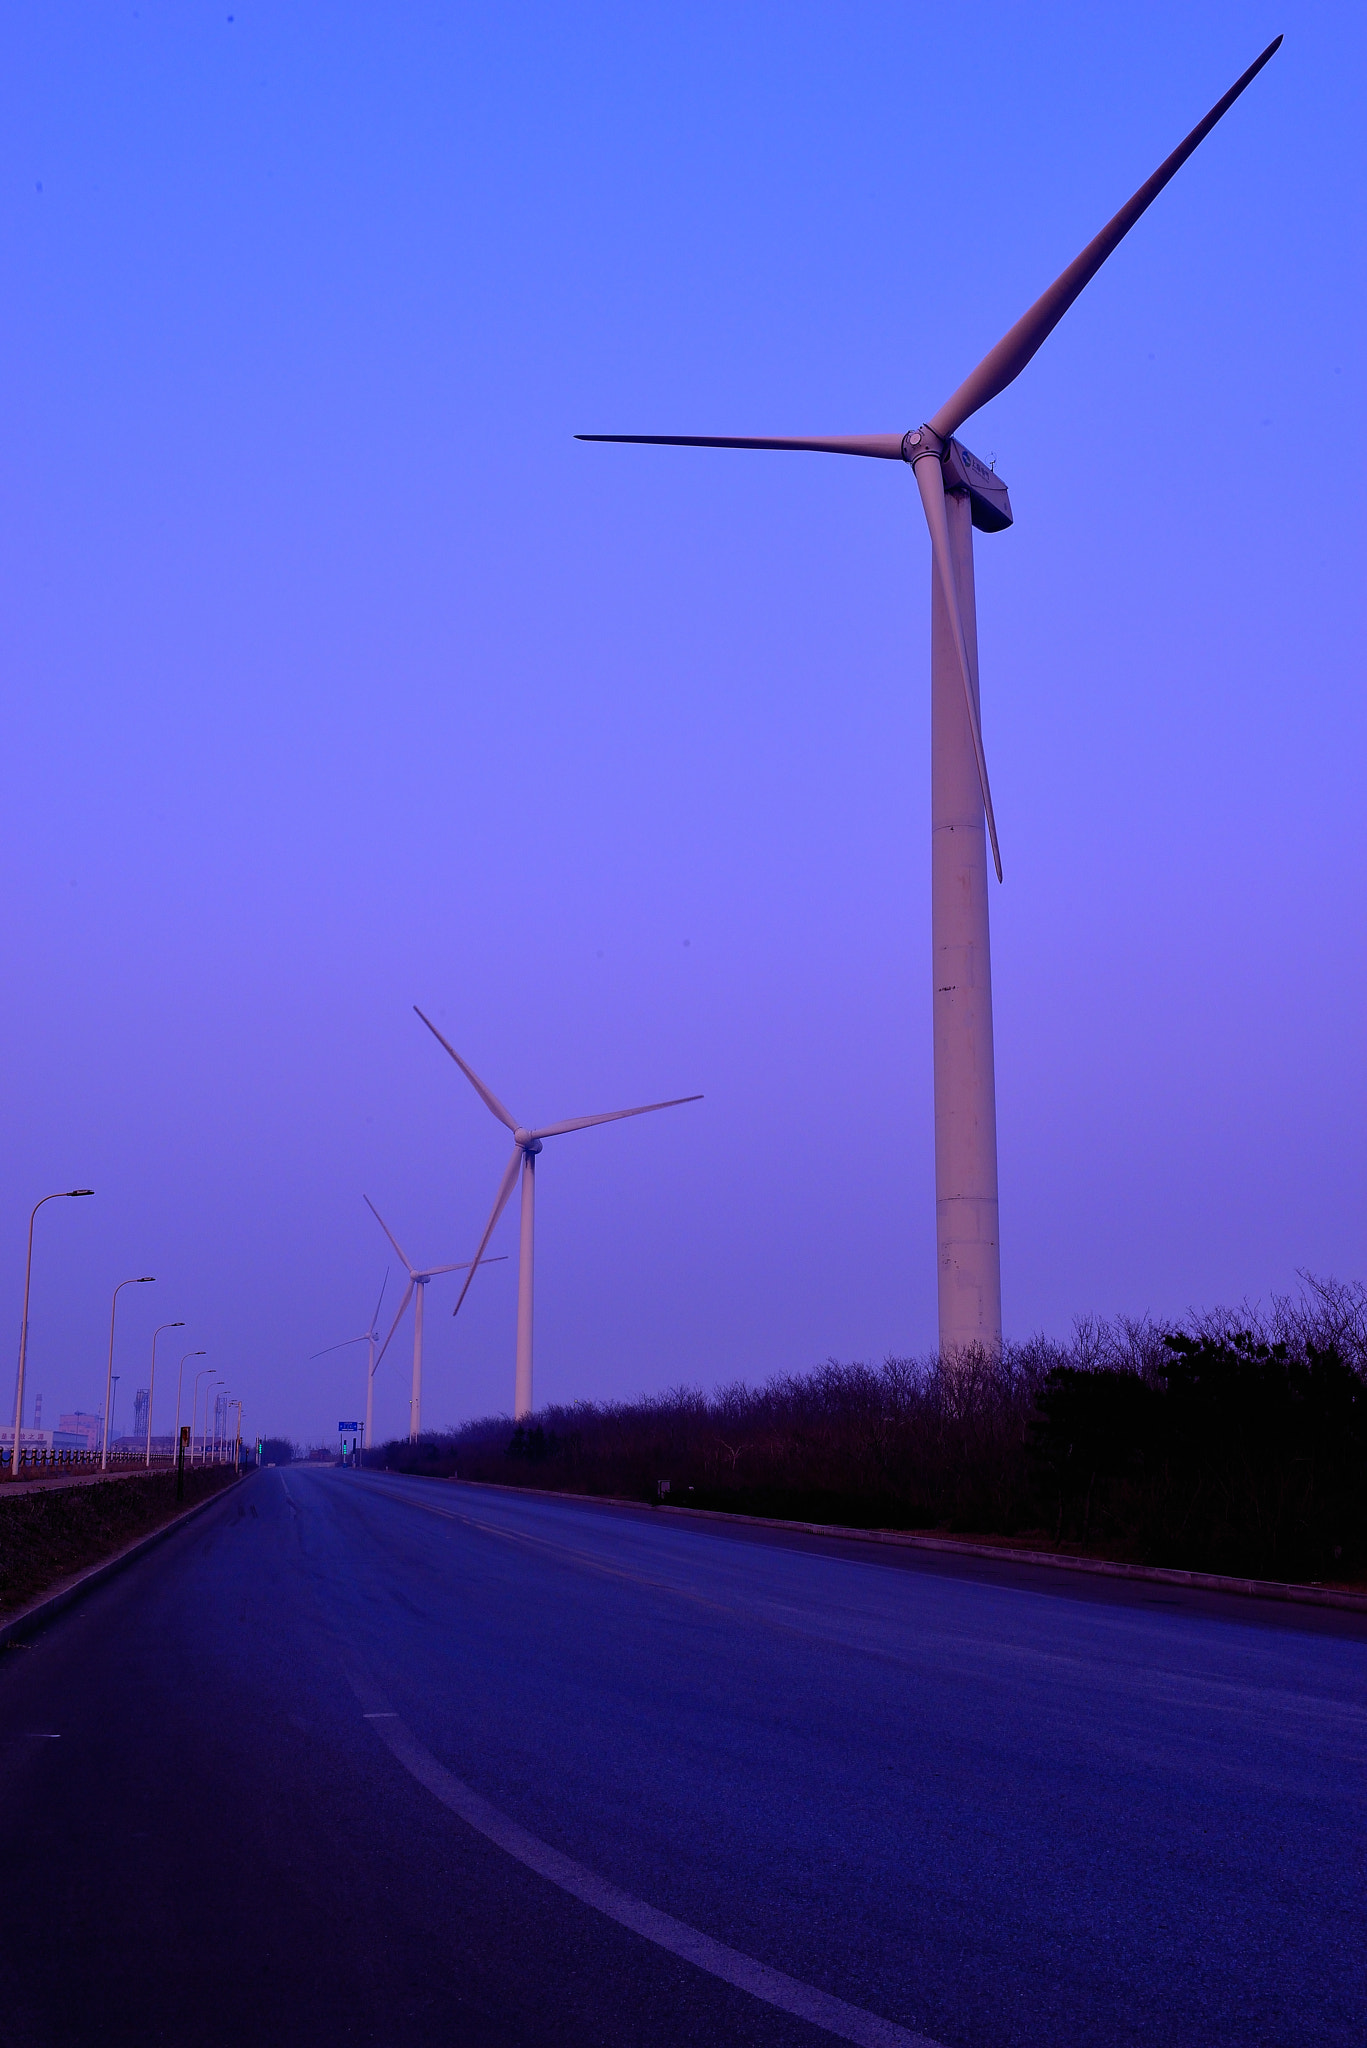 Nikon D800E sample photo. Windmill in china, which provides power supply for a steel plant. clean enery by the seaside. photography